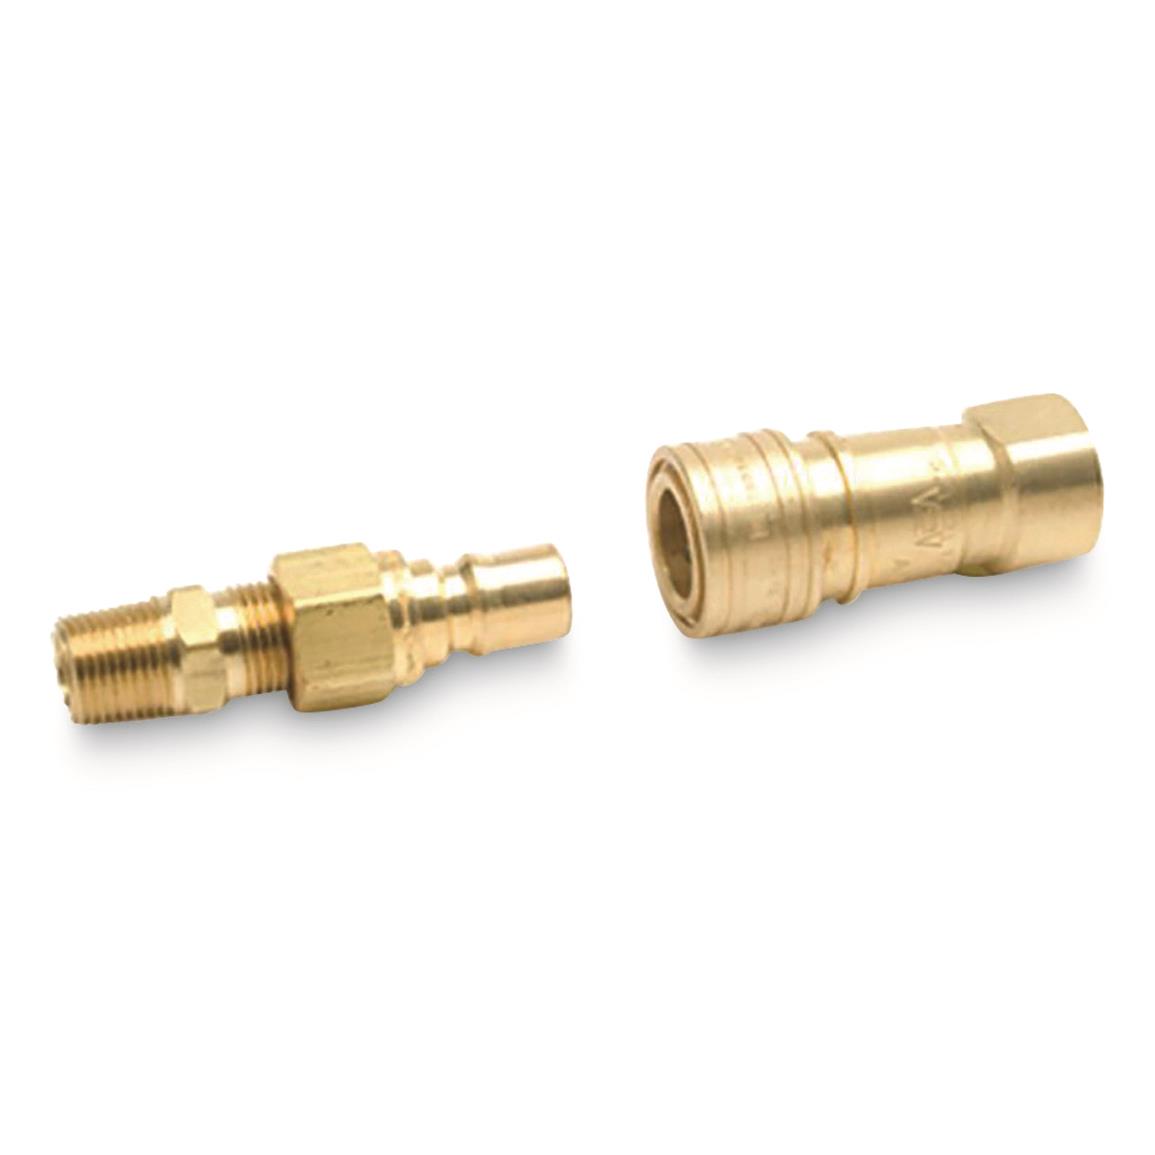 Mr. Heater Propane/Natural Gas 3/8 in. Quick Connector and Full Flow Male Plug